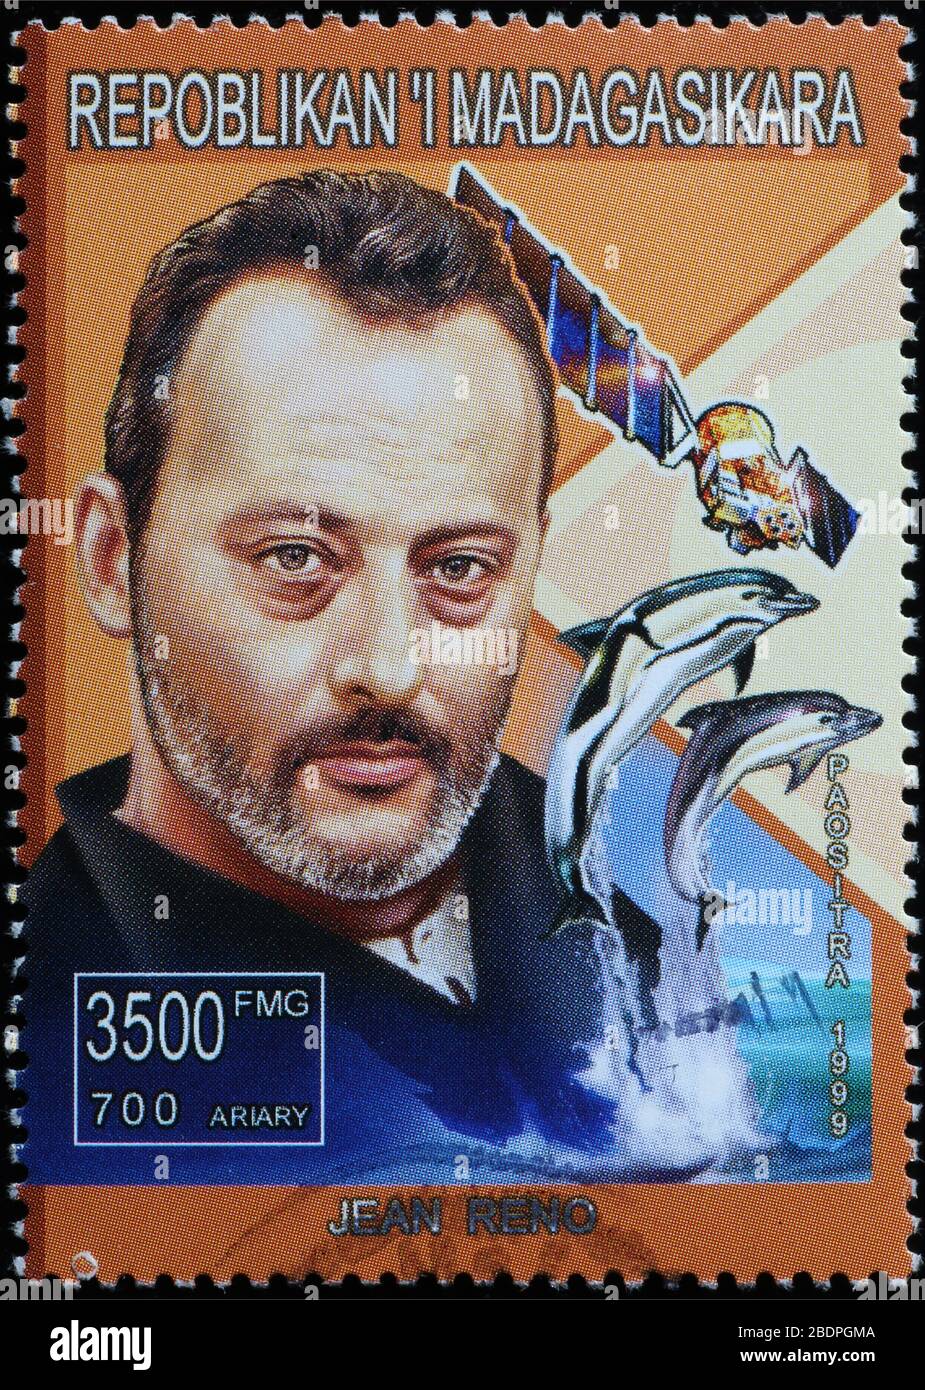 French actor Jean Reno on postage stamp Stock Photo